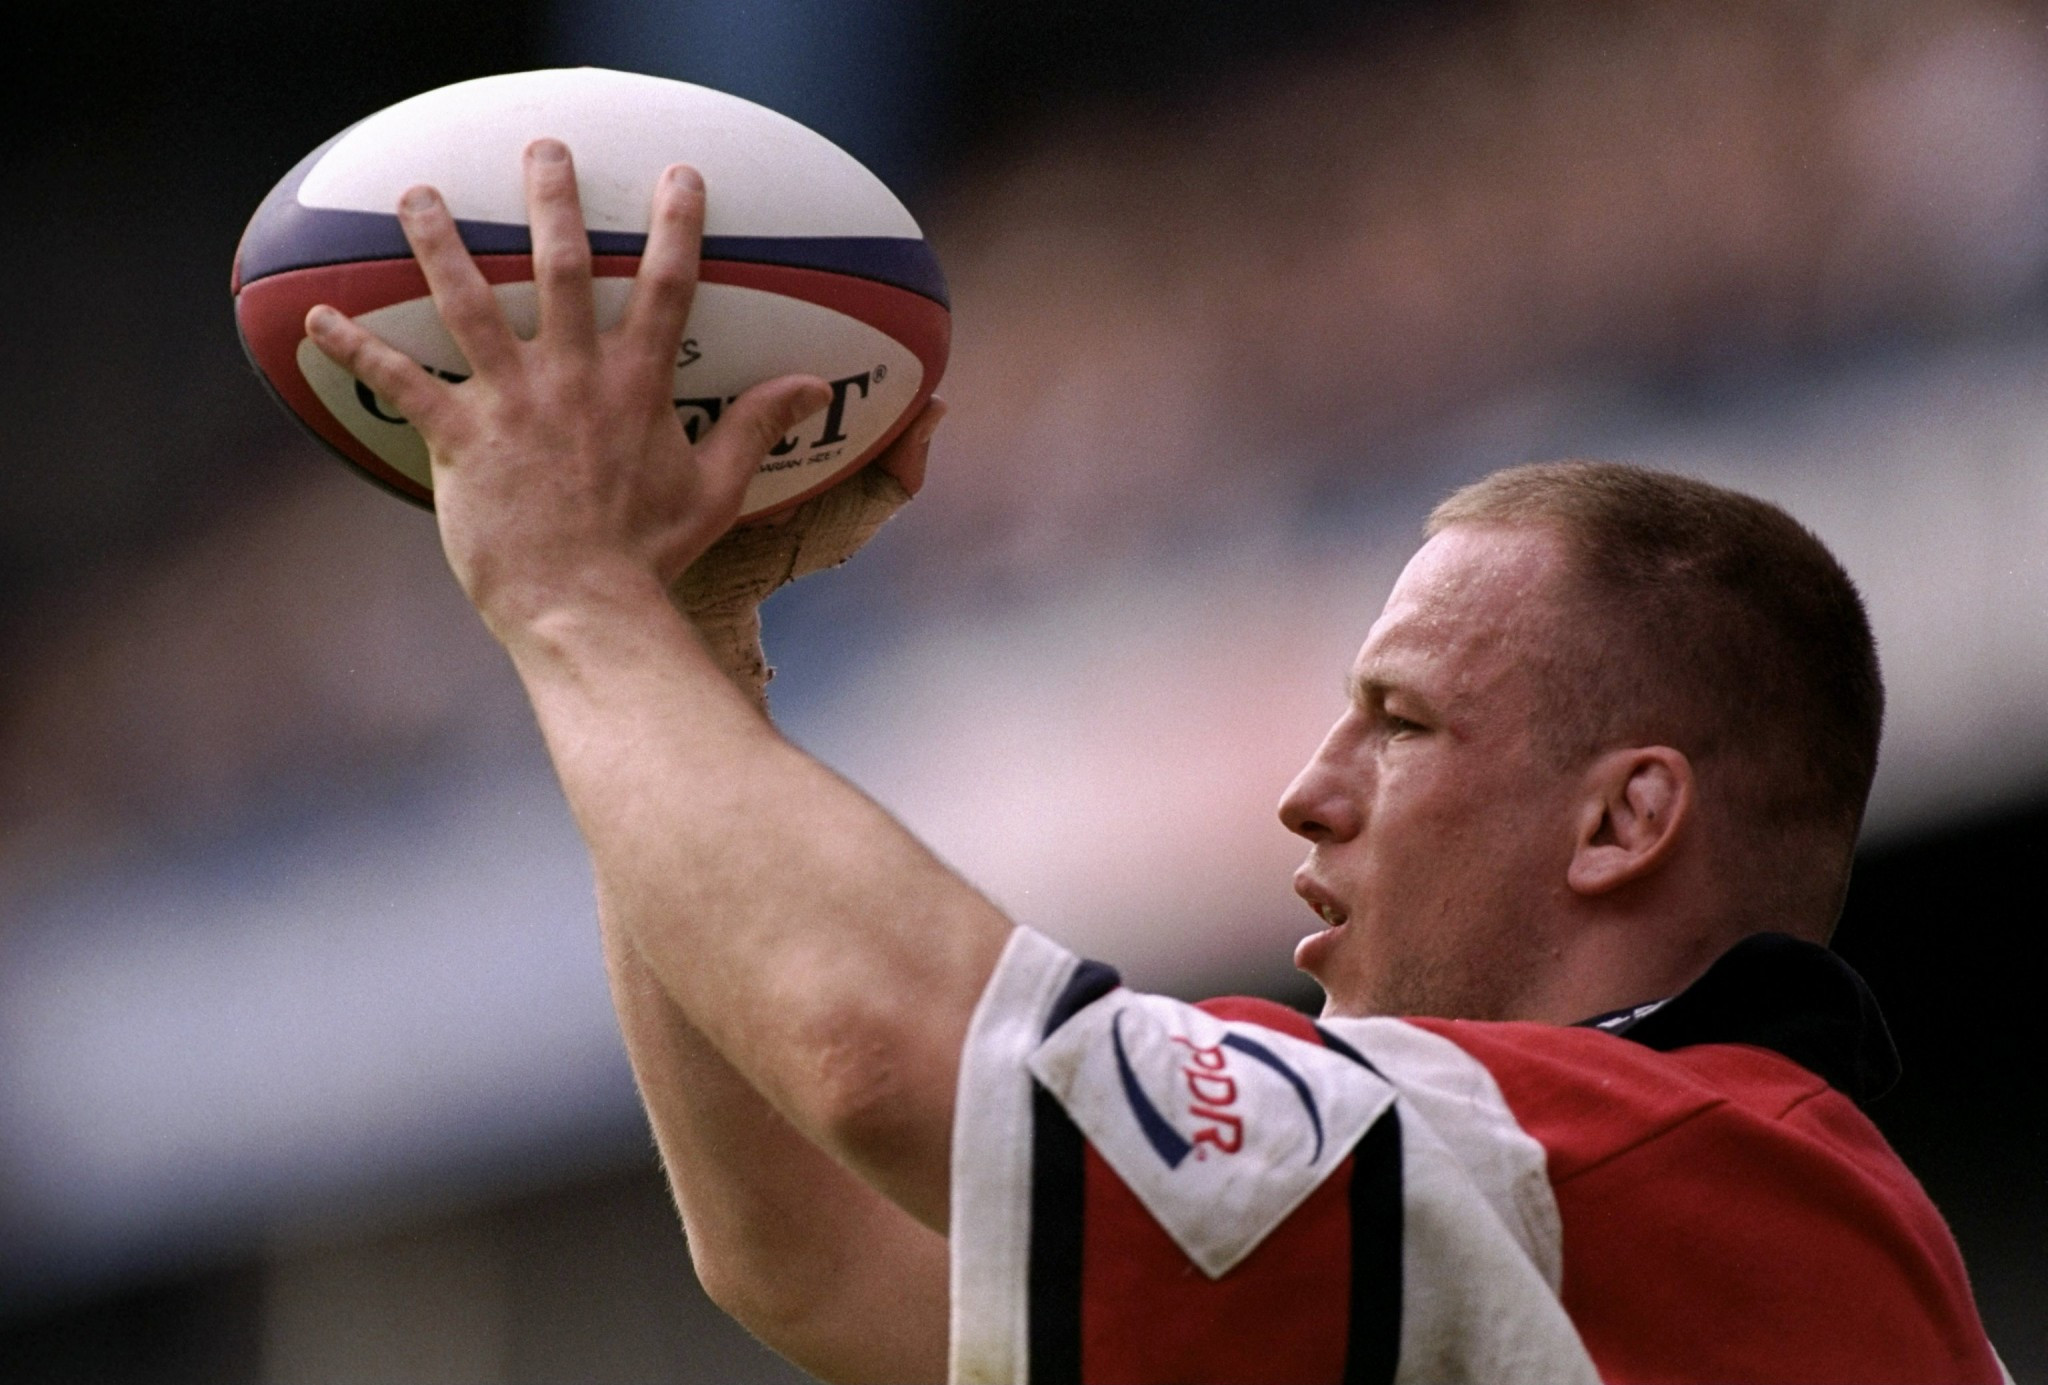 Neil McCarthy's rugby career saw him play for sides including Bath and Gloucester ©Getty Images